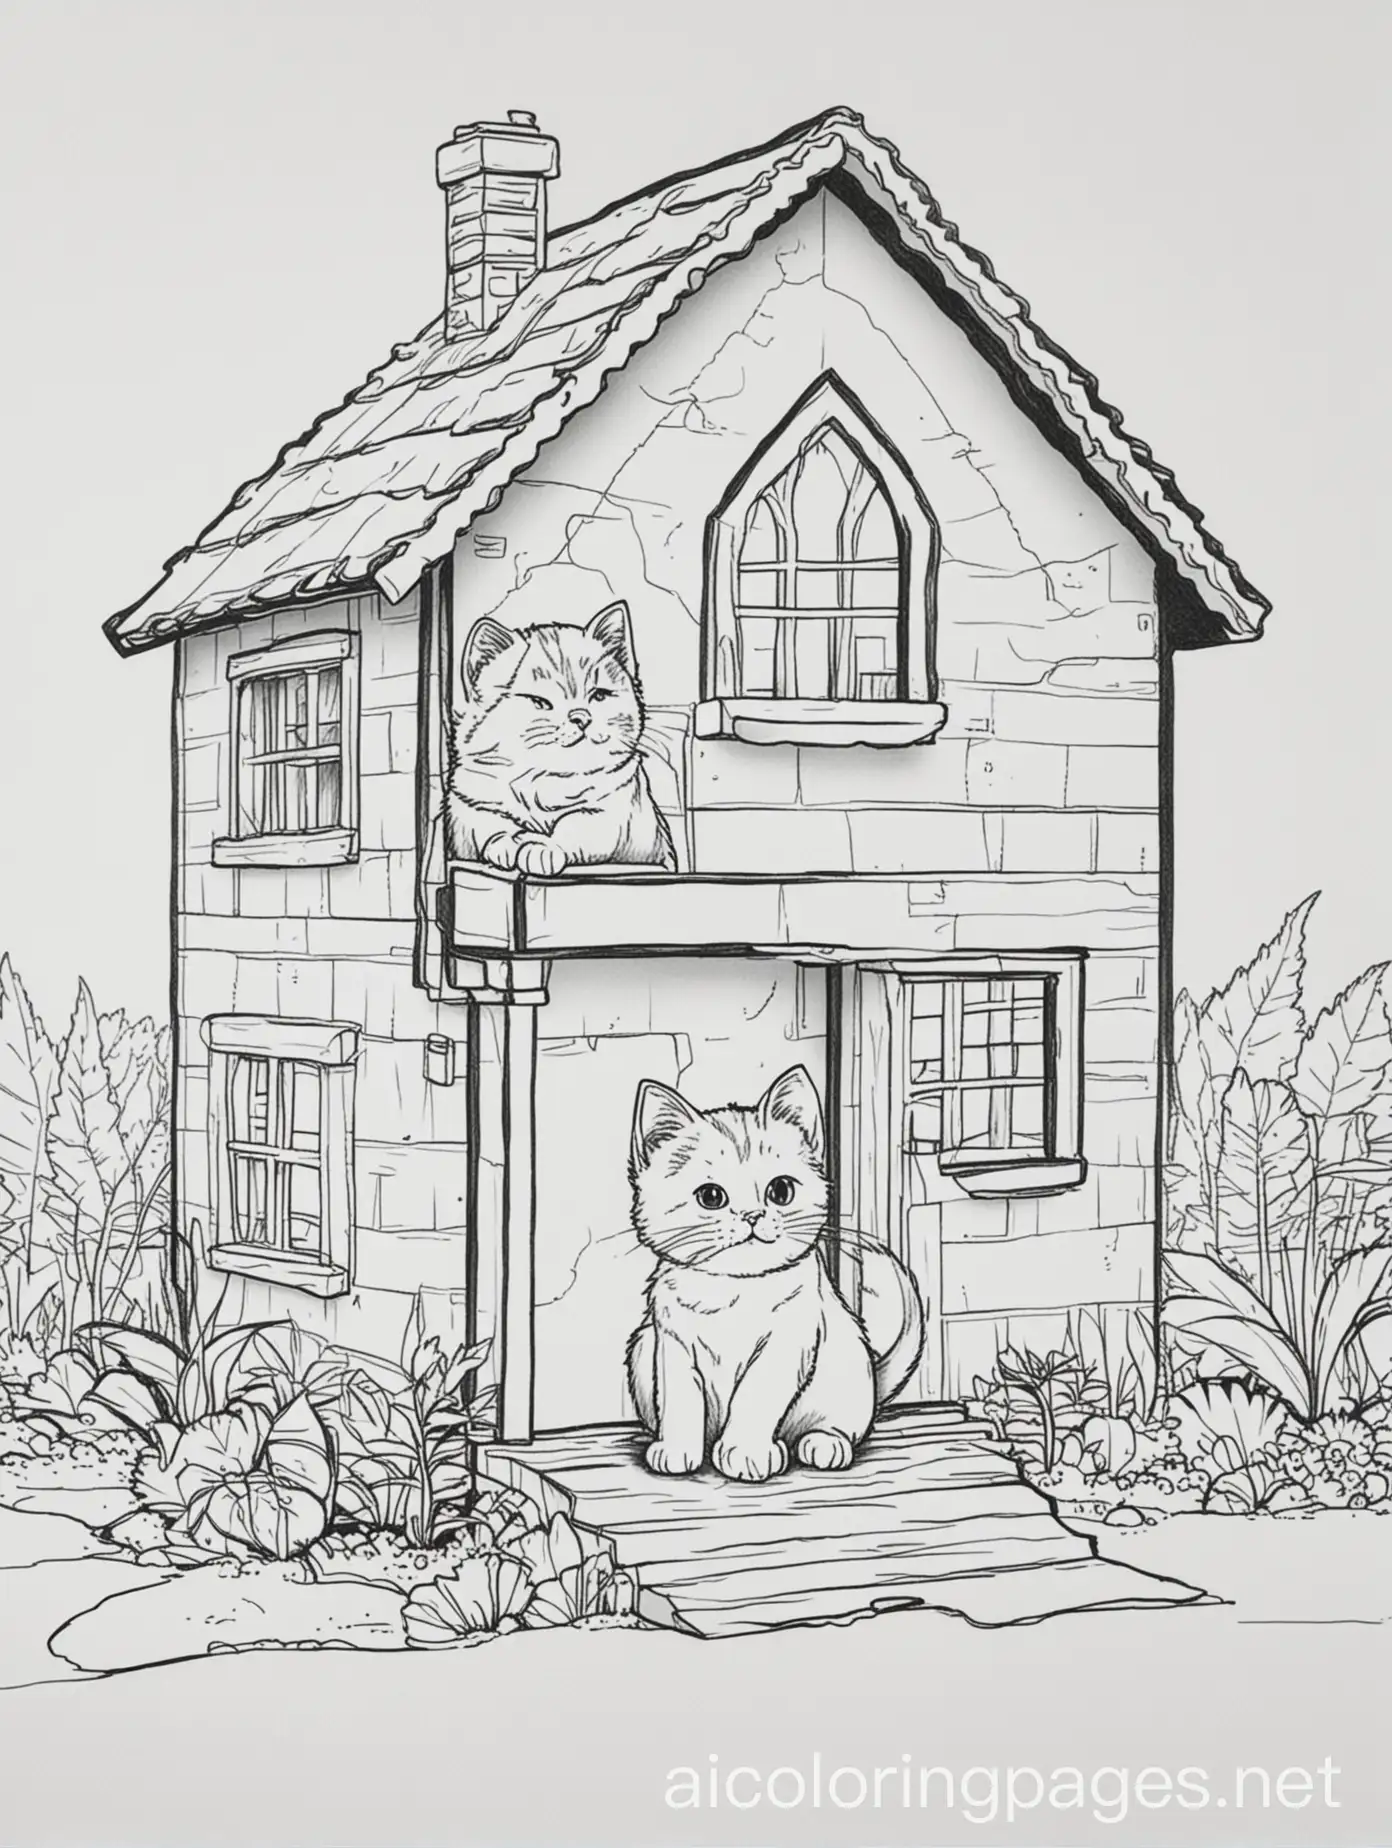 a cat in house, Coloring Page, black and white, line art, white background, Simplicity, Ample White Space. The background of the coloring page is plain white to make it easy for young children to color within the lines. The outlines of all the subjects are easy to distinguish, making it simple for kids to color without too much difficulty